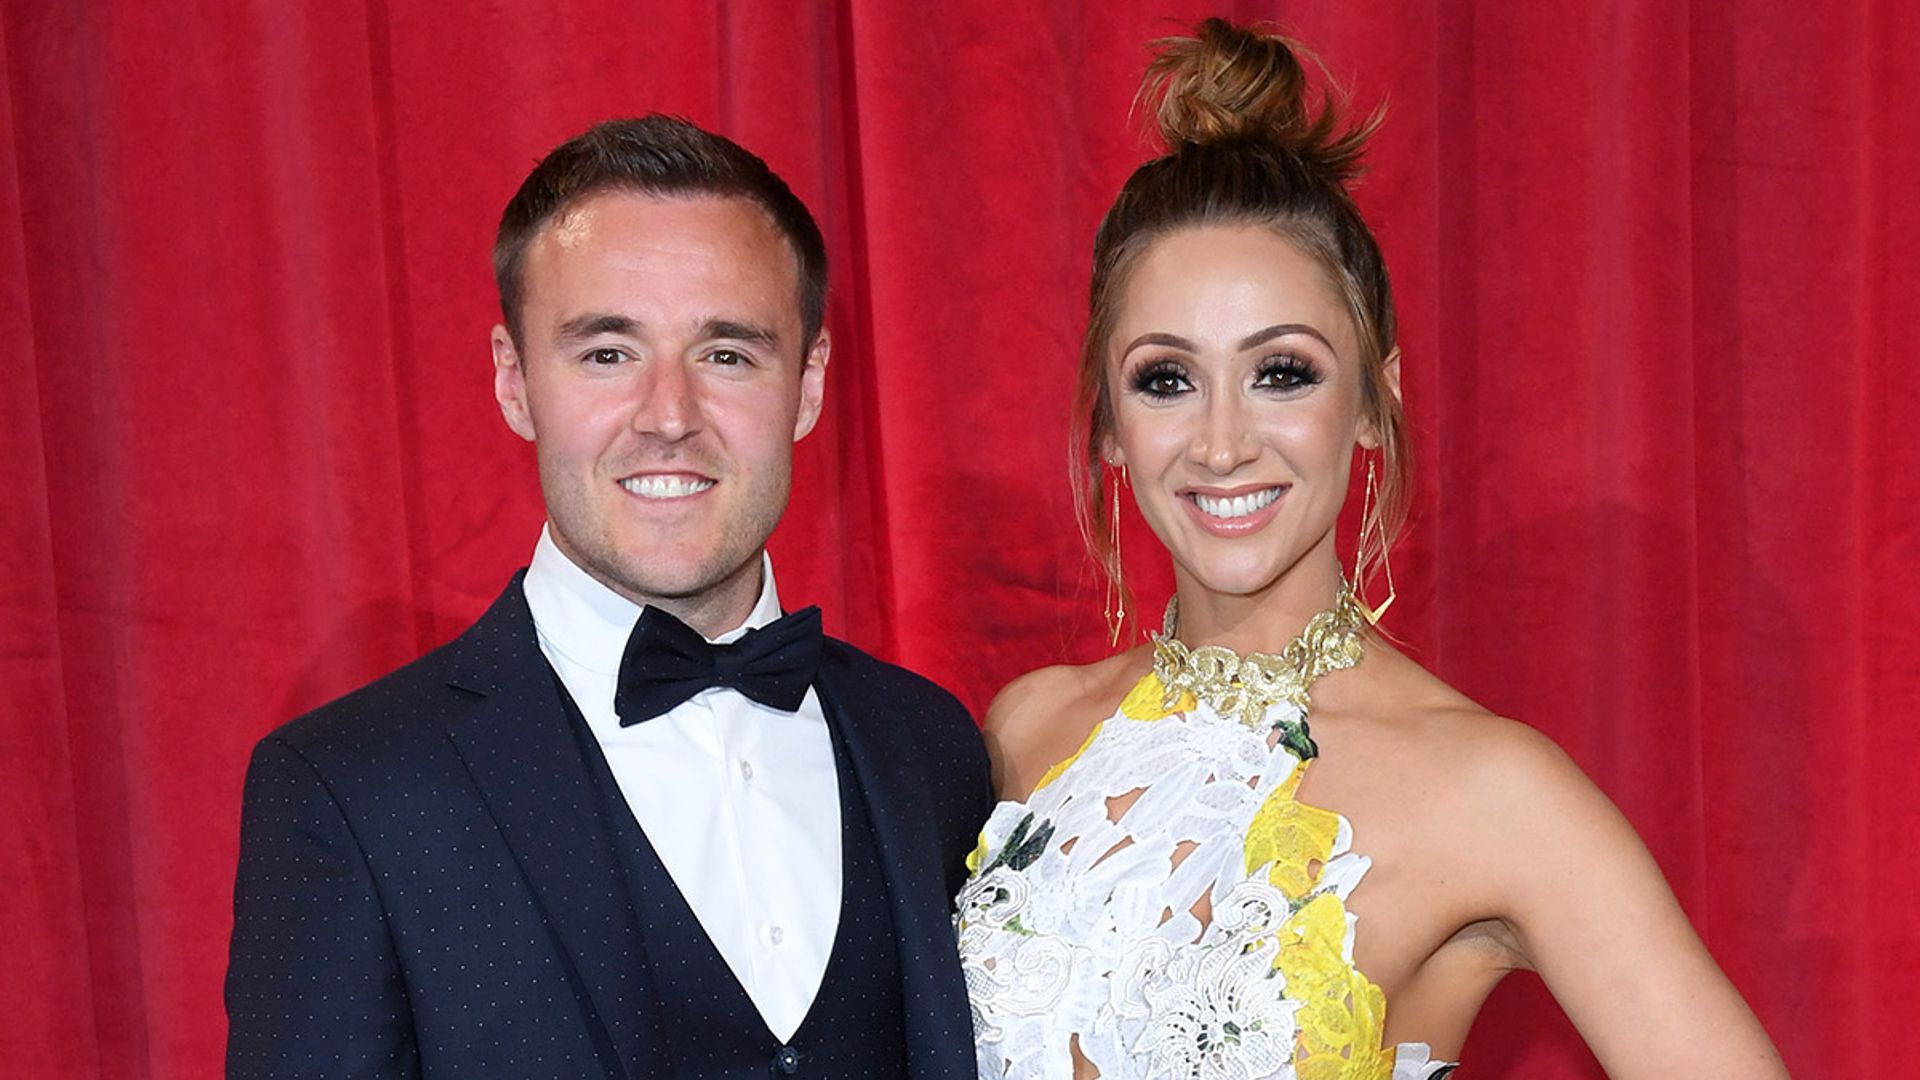 lucy jo hudson and alan halsall on red carpet